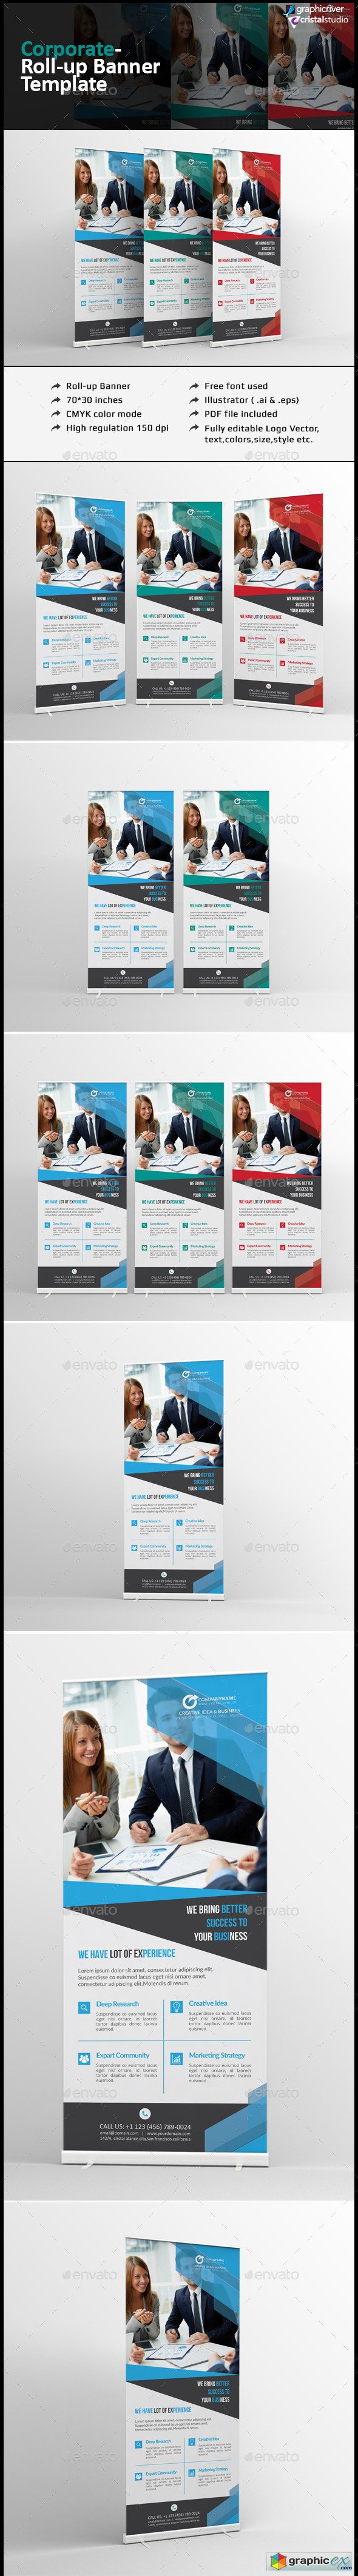 Corporate Roll-up Banner 12430216